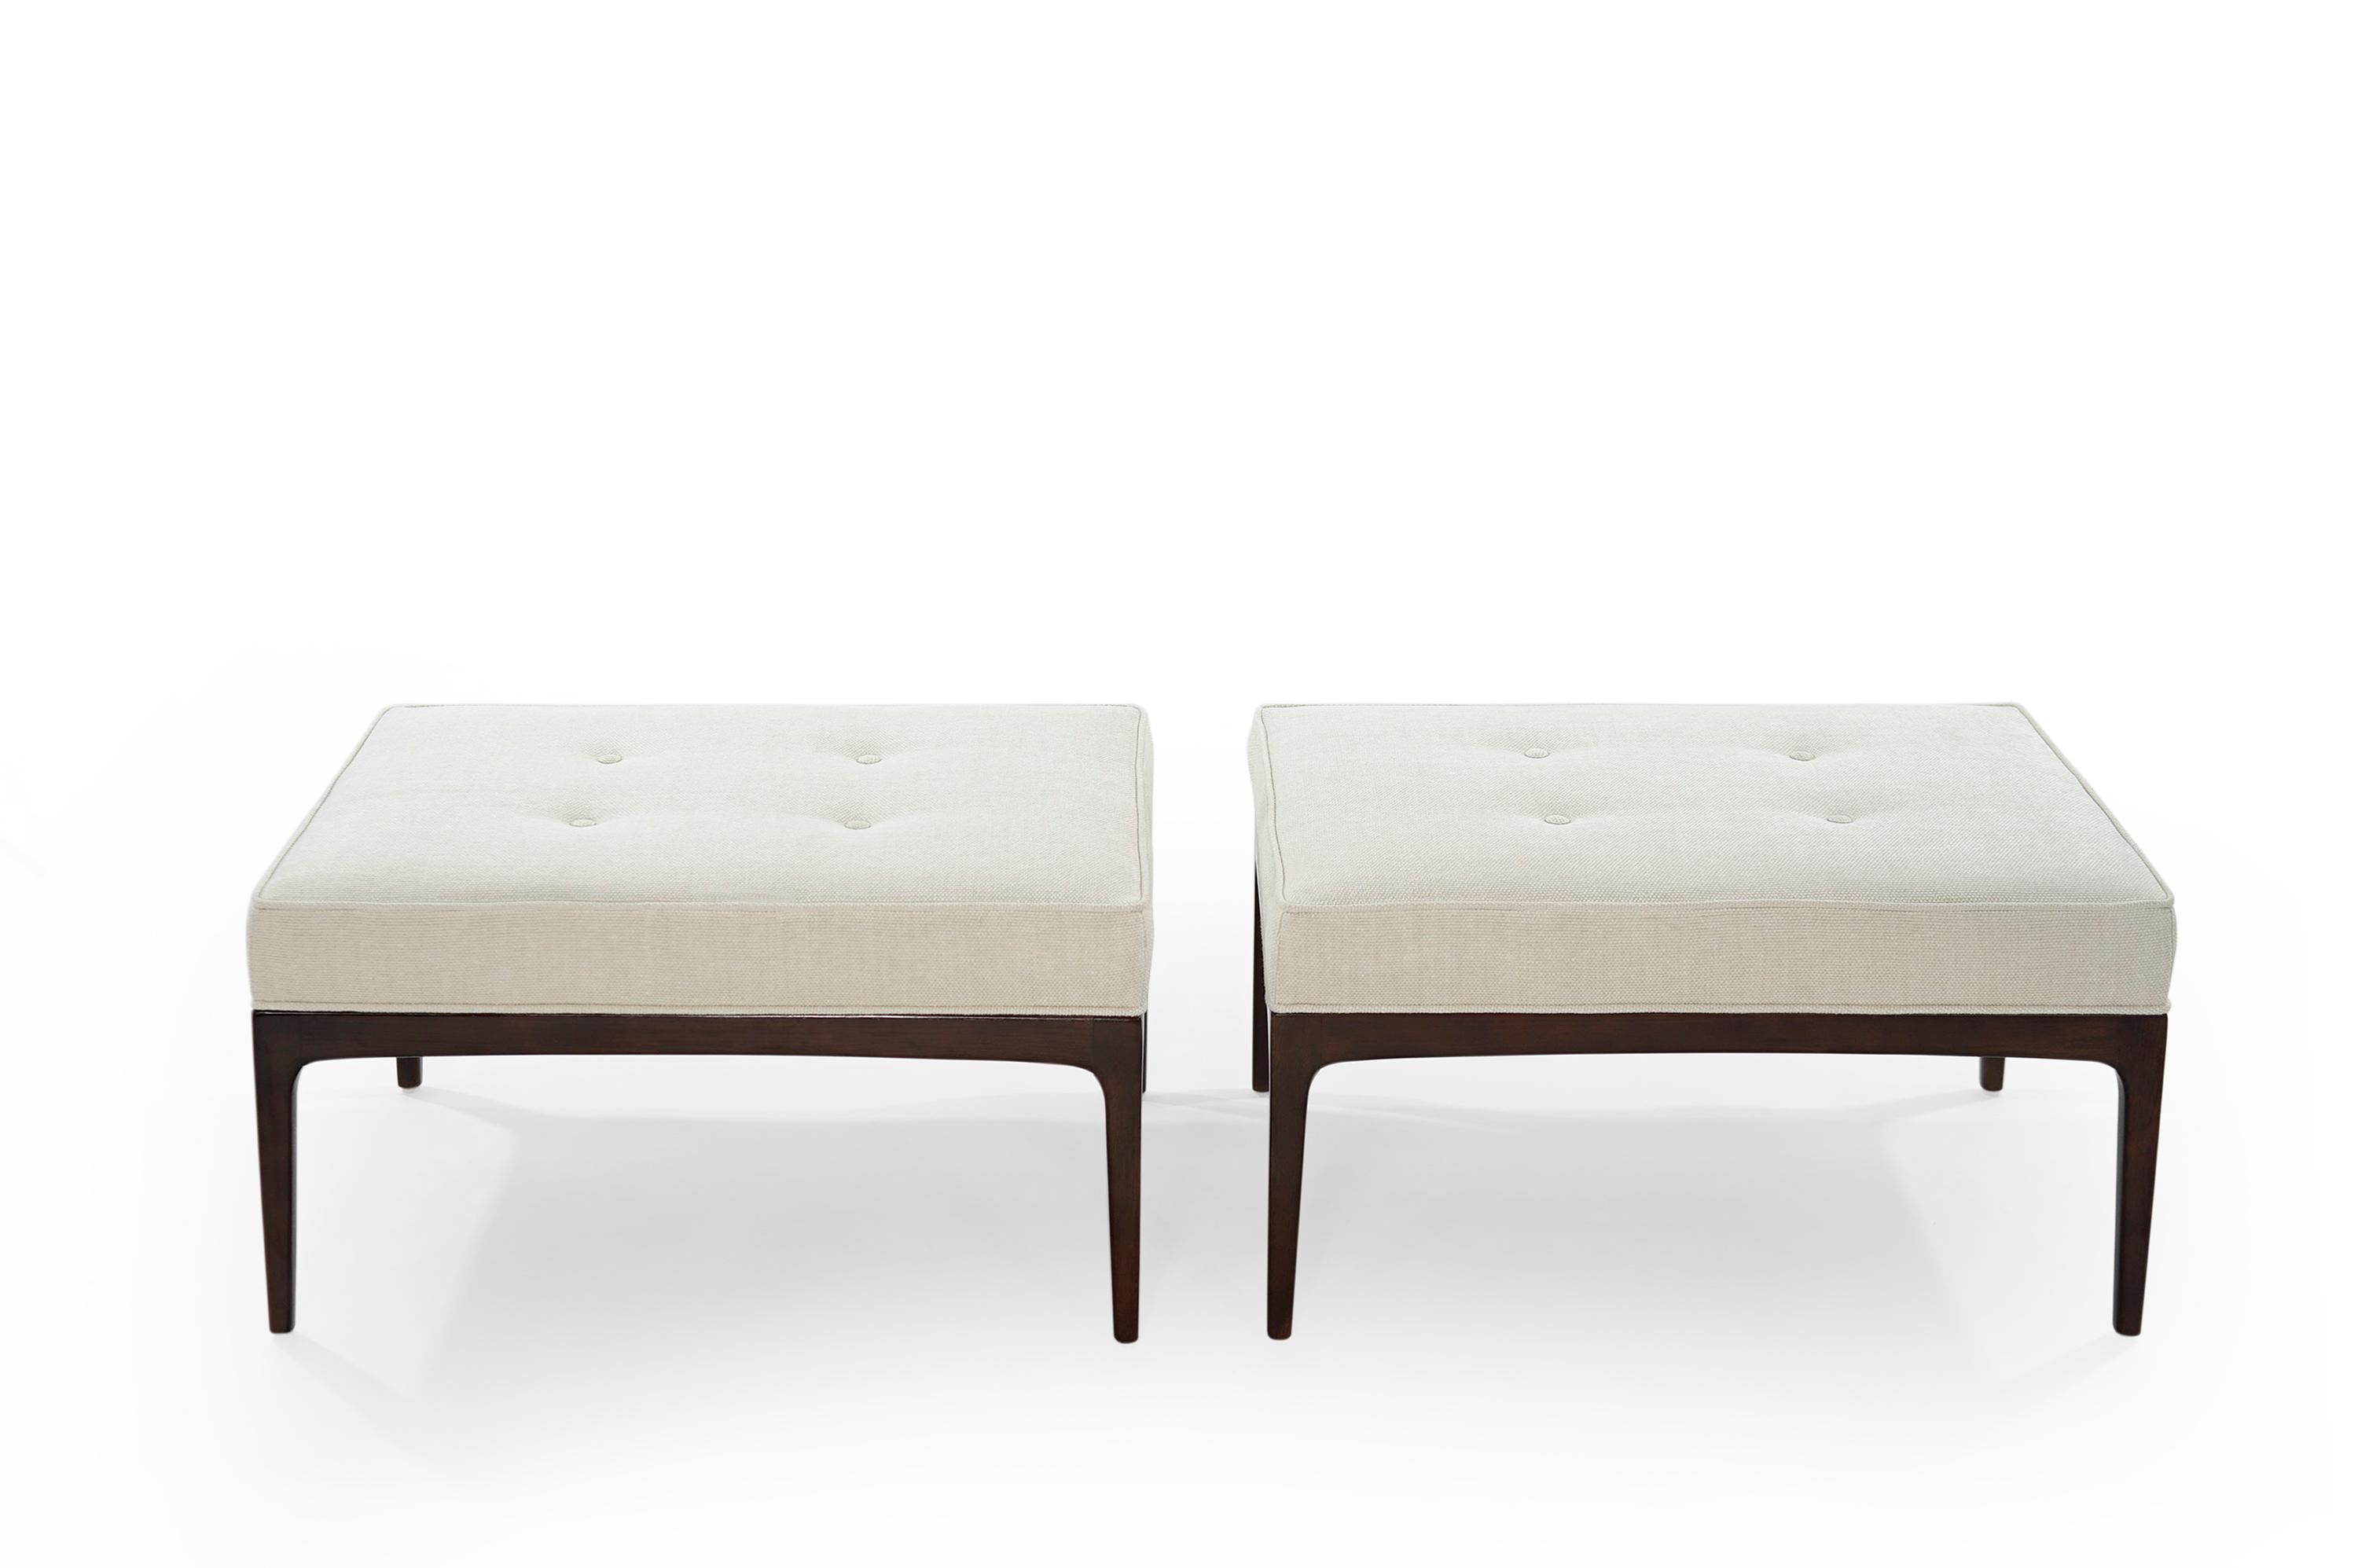 Pair of benches in the style of Paul McCobb, walnut bases fully restored. Re-upholstered in off-white twill by Holly Hunt.